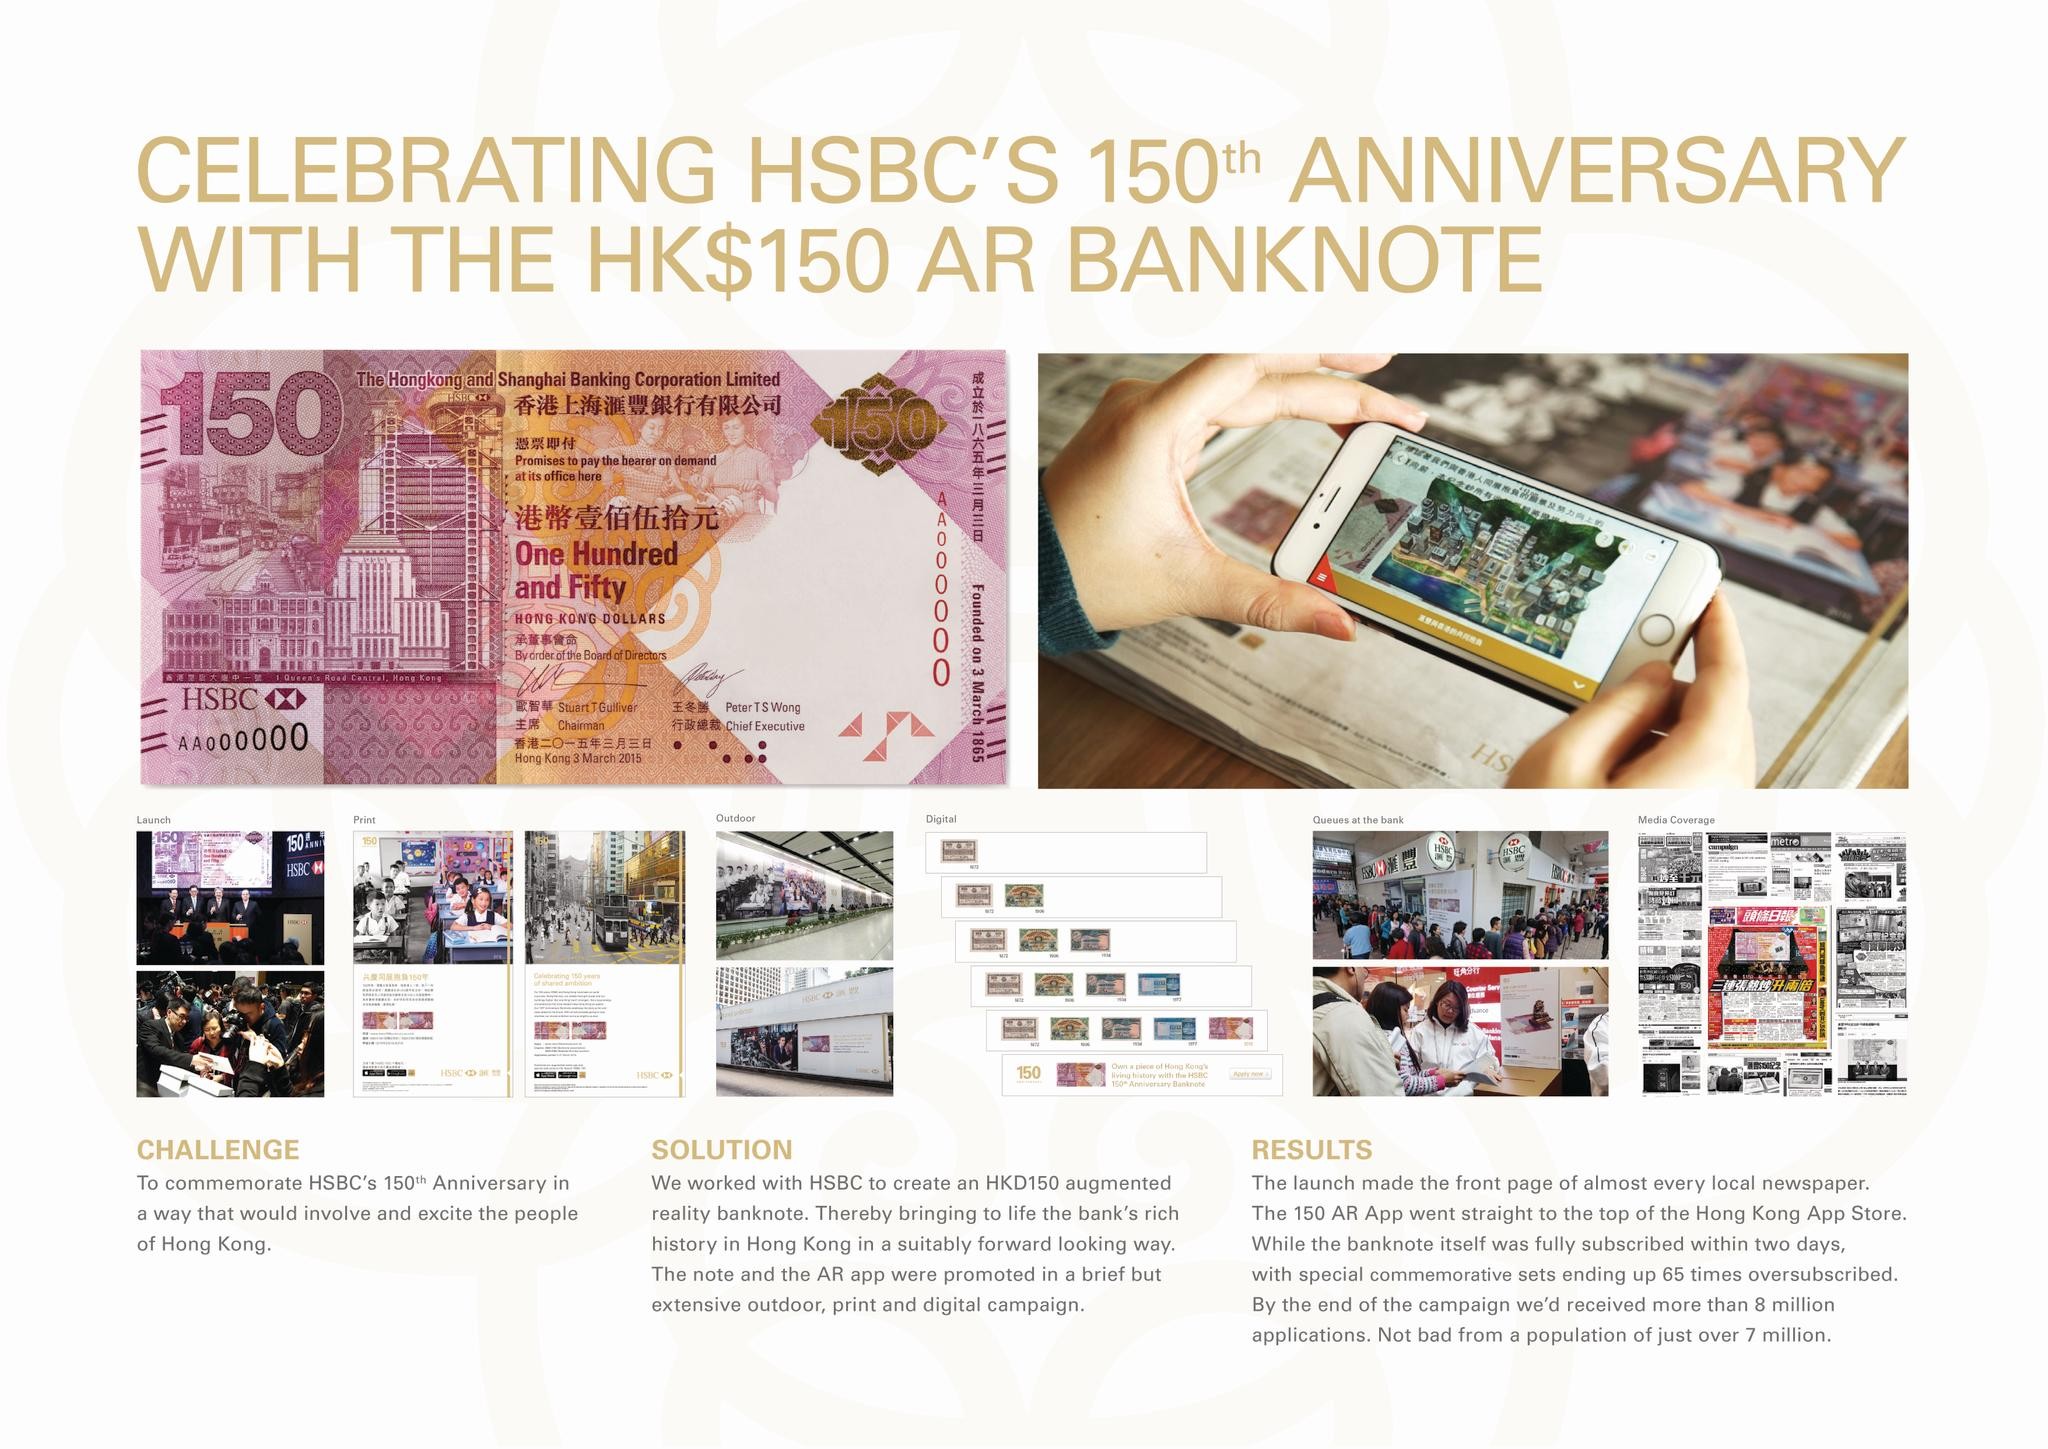 THE HSBC $150 AR BANKNOTE